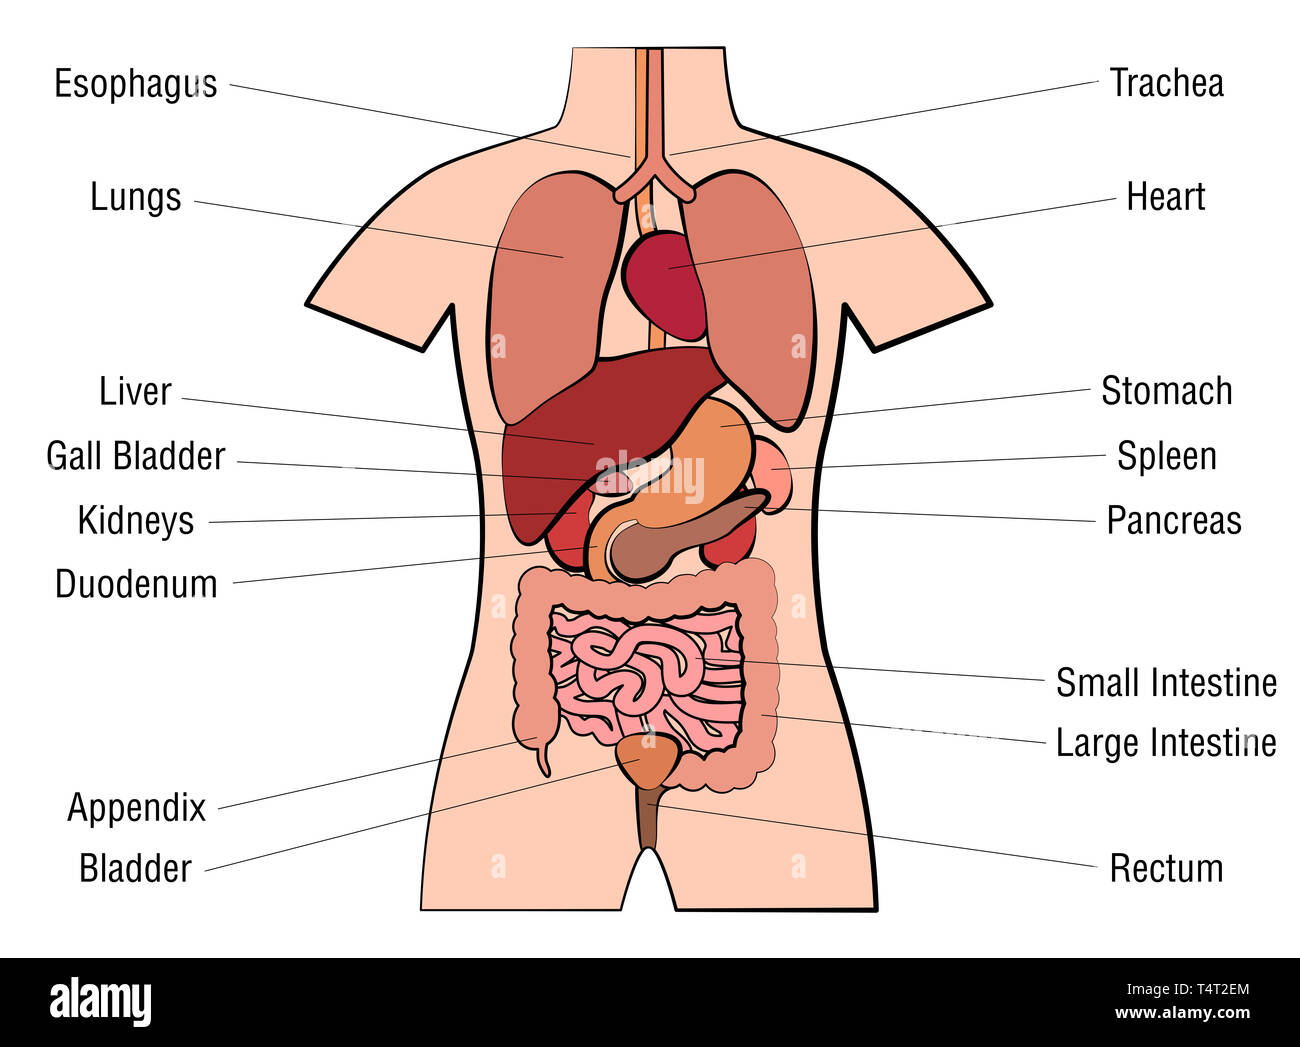 The The Liver Anatomical Chart